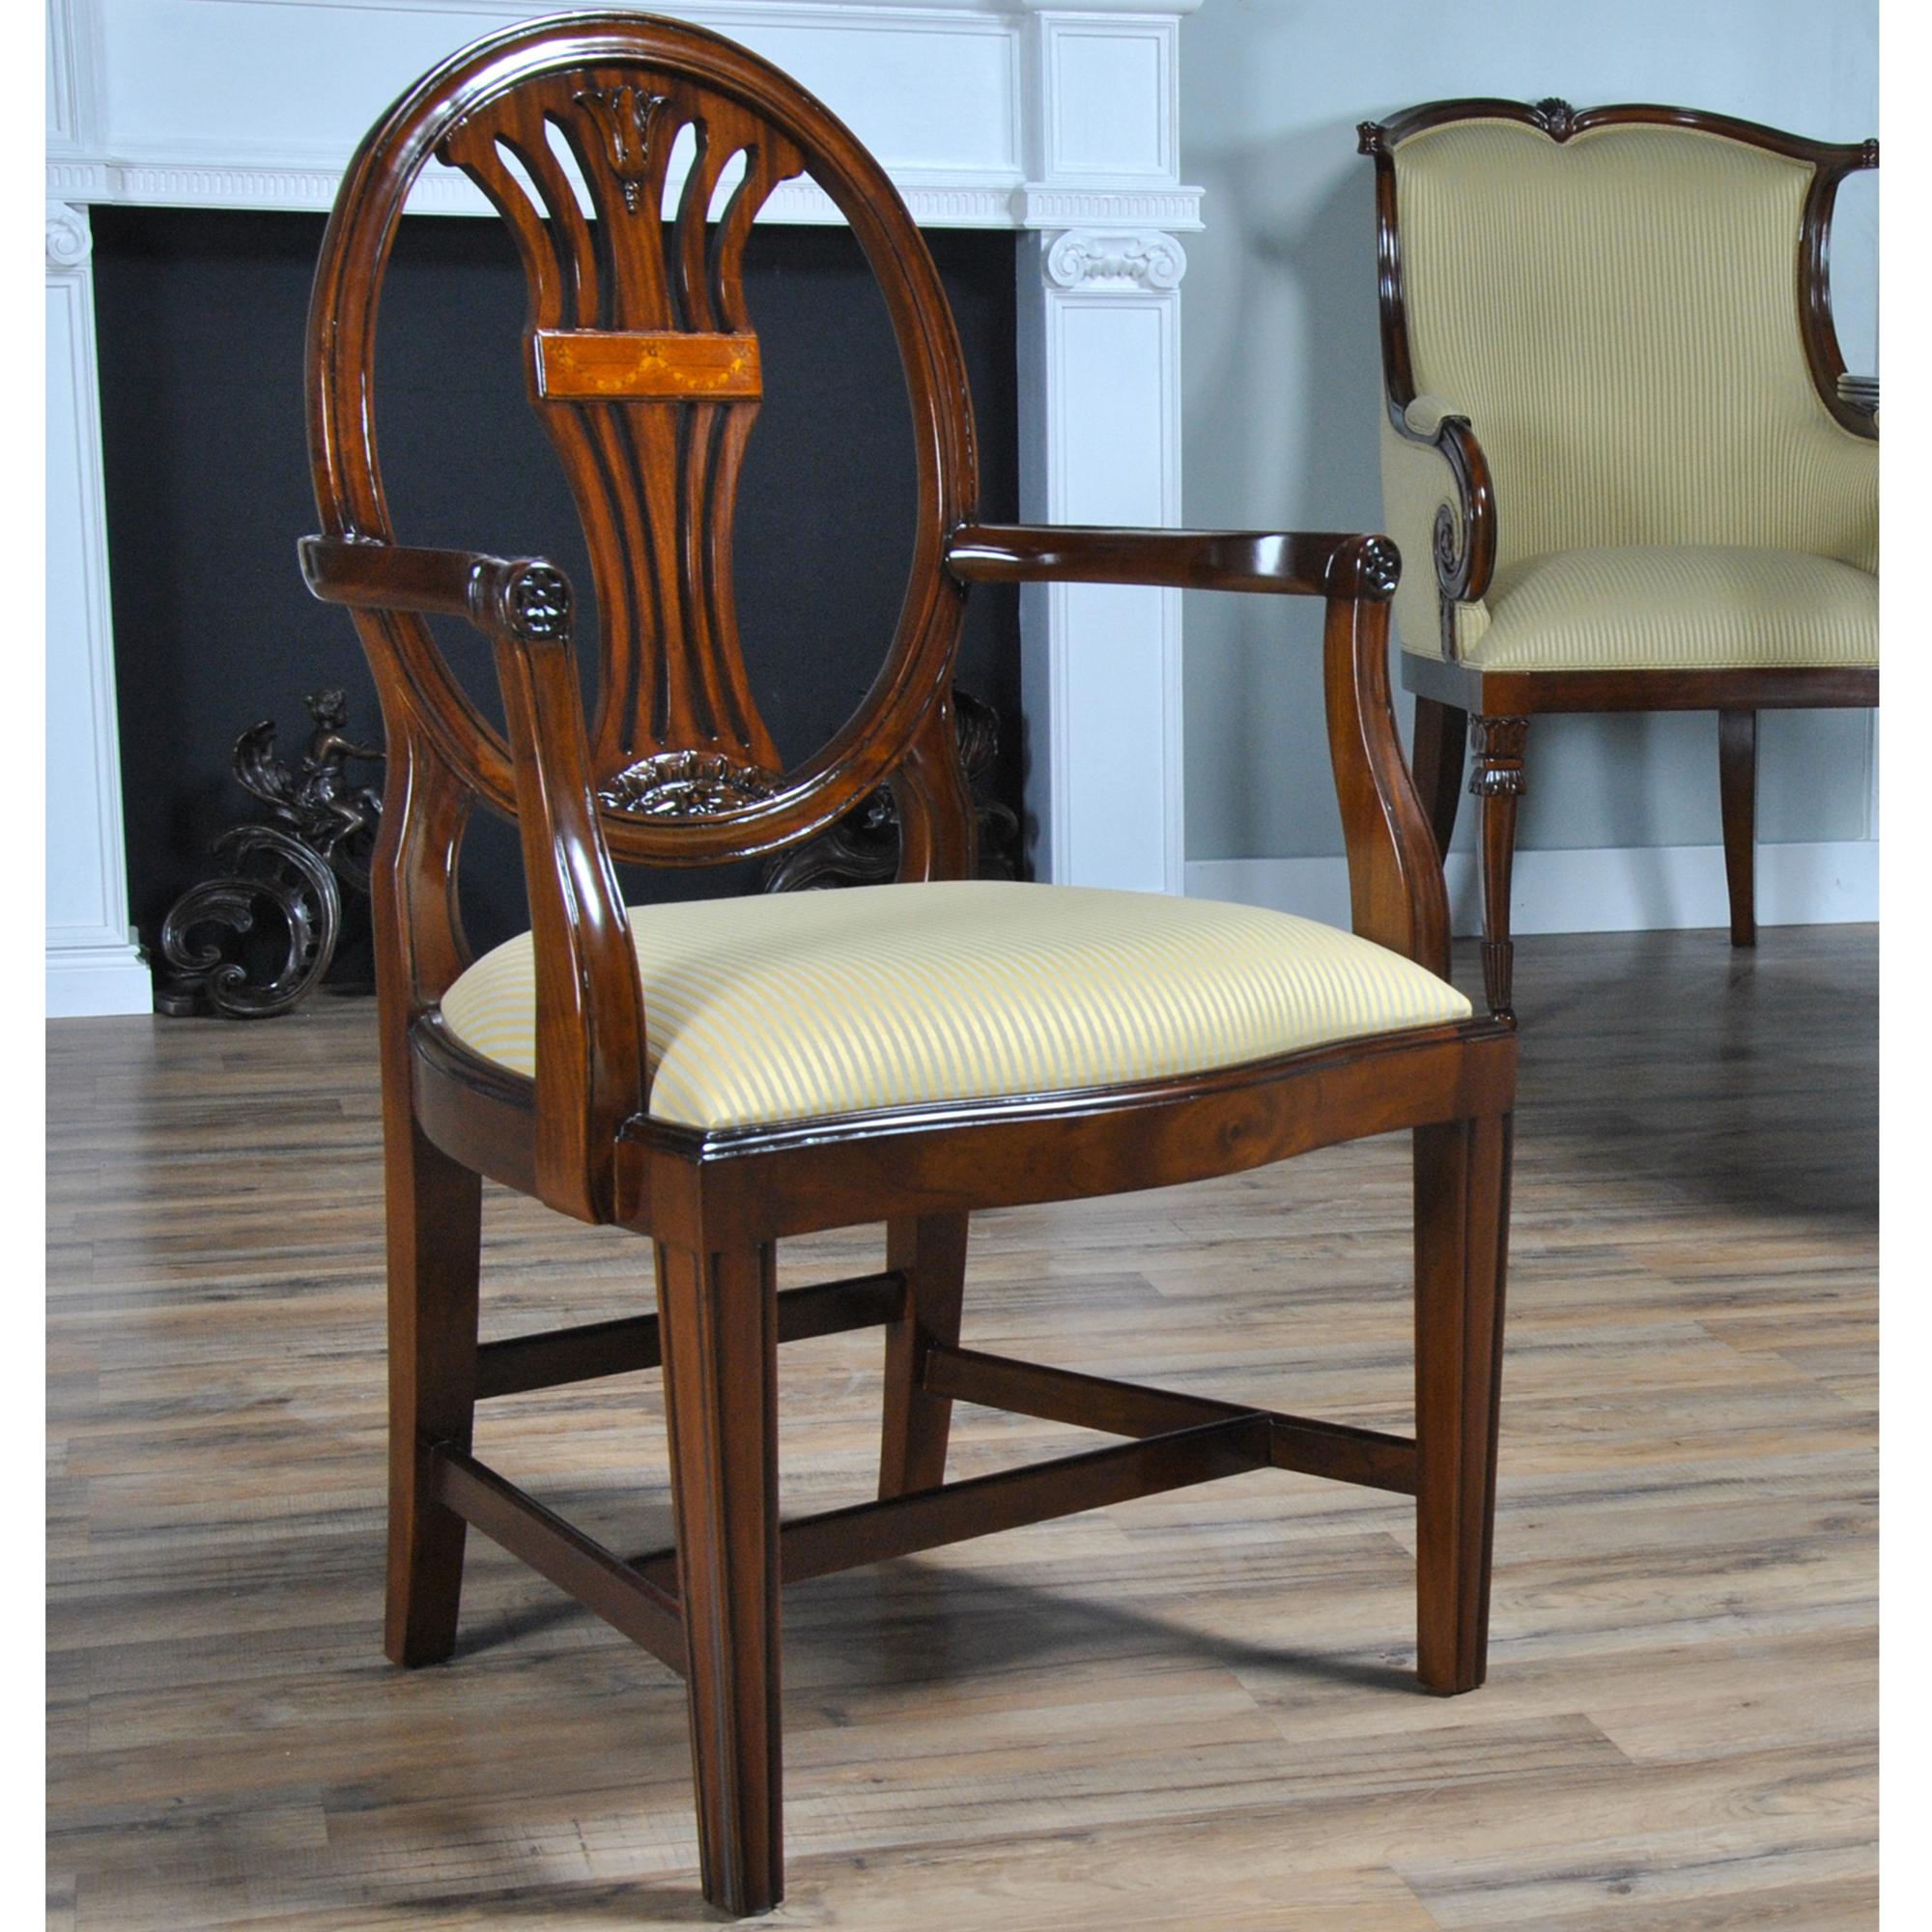 A Set of 10 Oval Back Inlaid Chairs with 2 arm chairs and 8 side chairs. These chairs feature great design and high quality workmanship and materials. A super look featuring scrolled and shaped arms, hand inlaid design in the center of the back